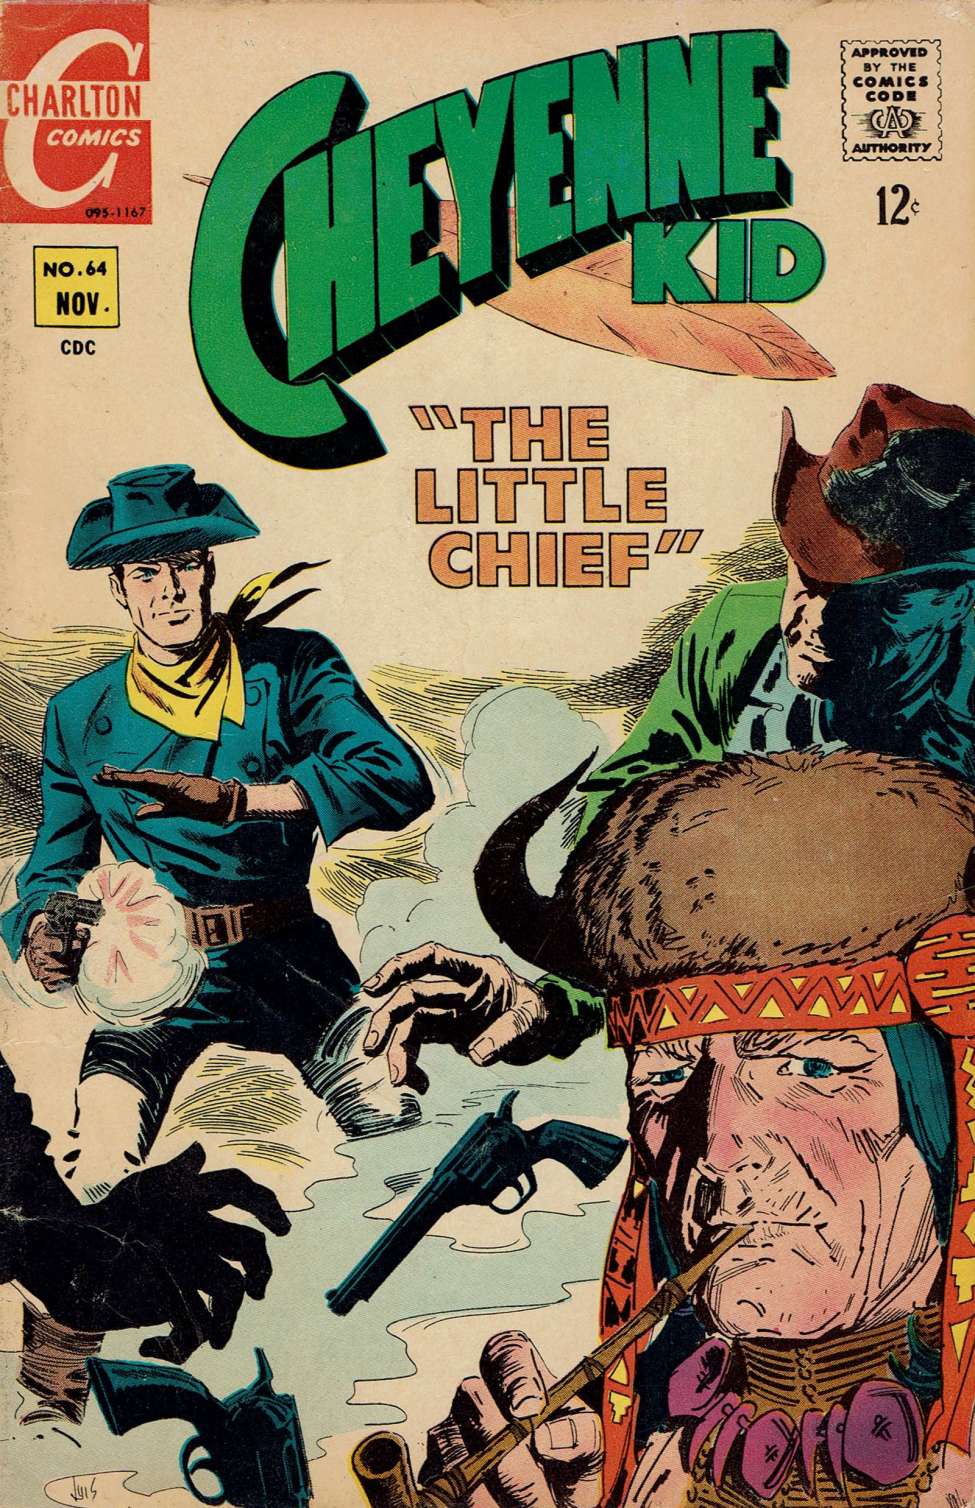 Comic Book Cover For Cheyenne Kid 64 - Version 2